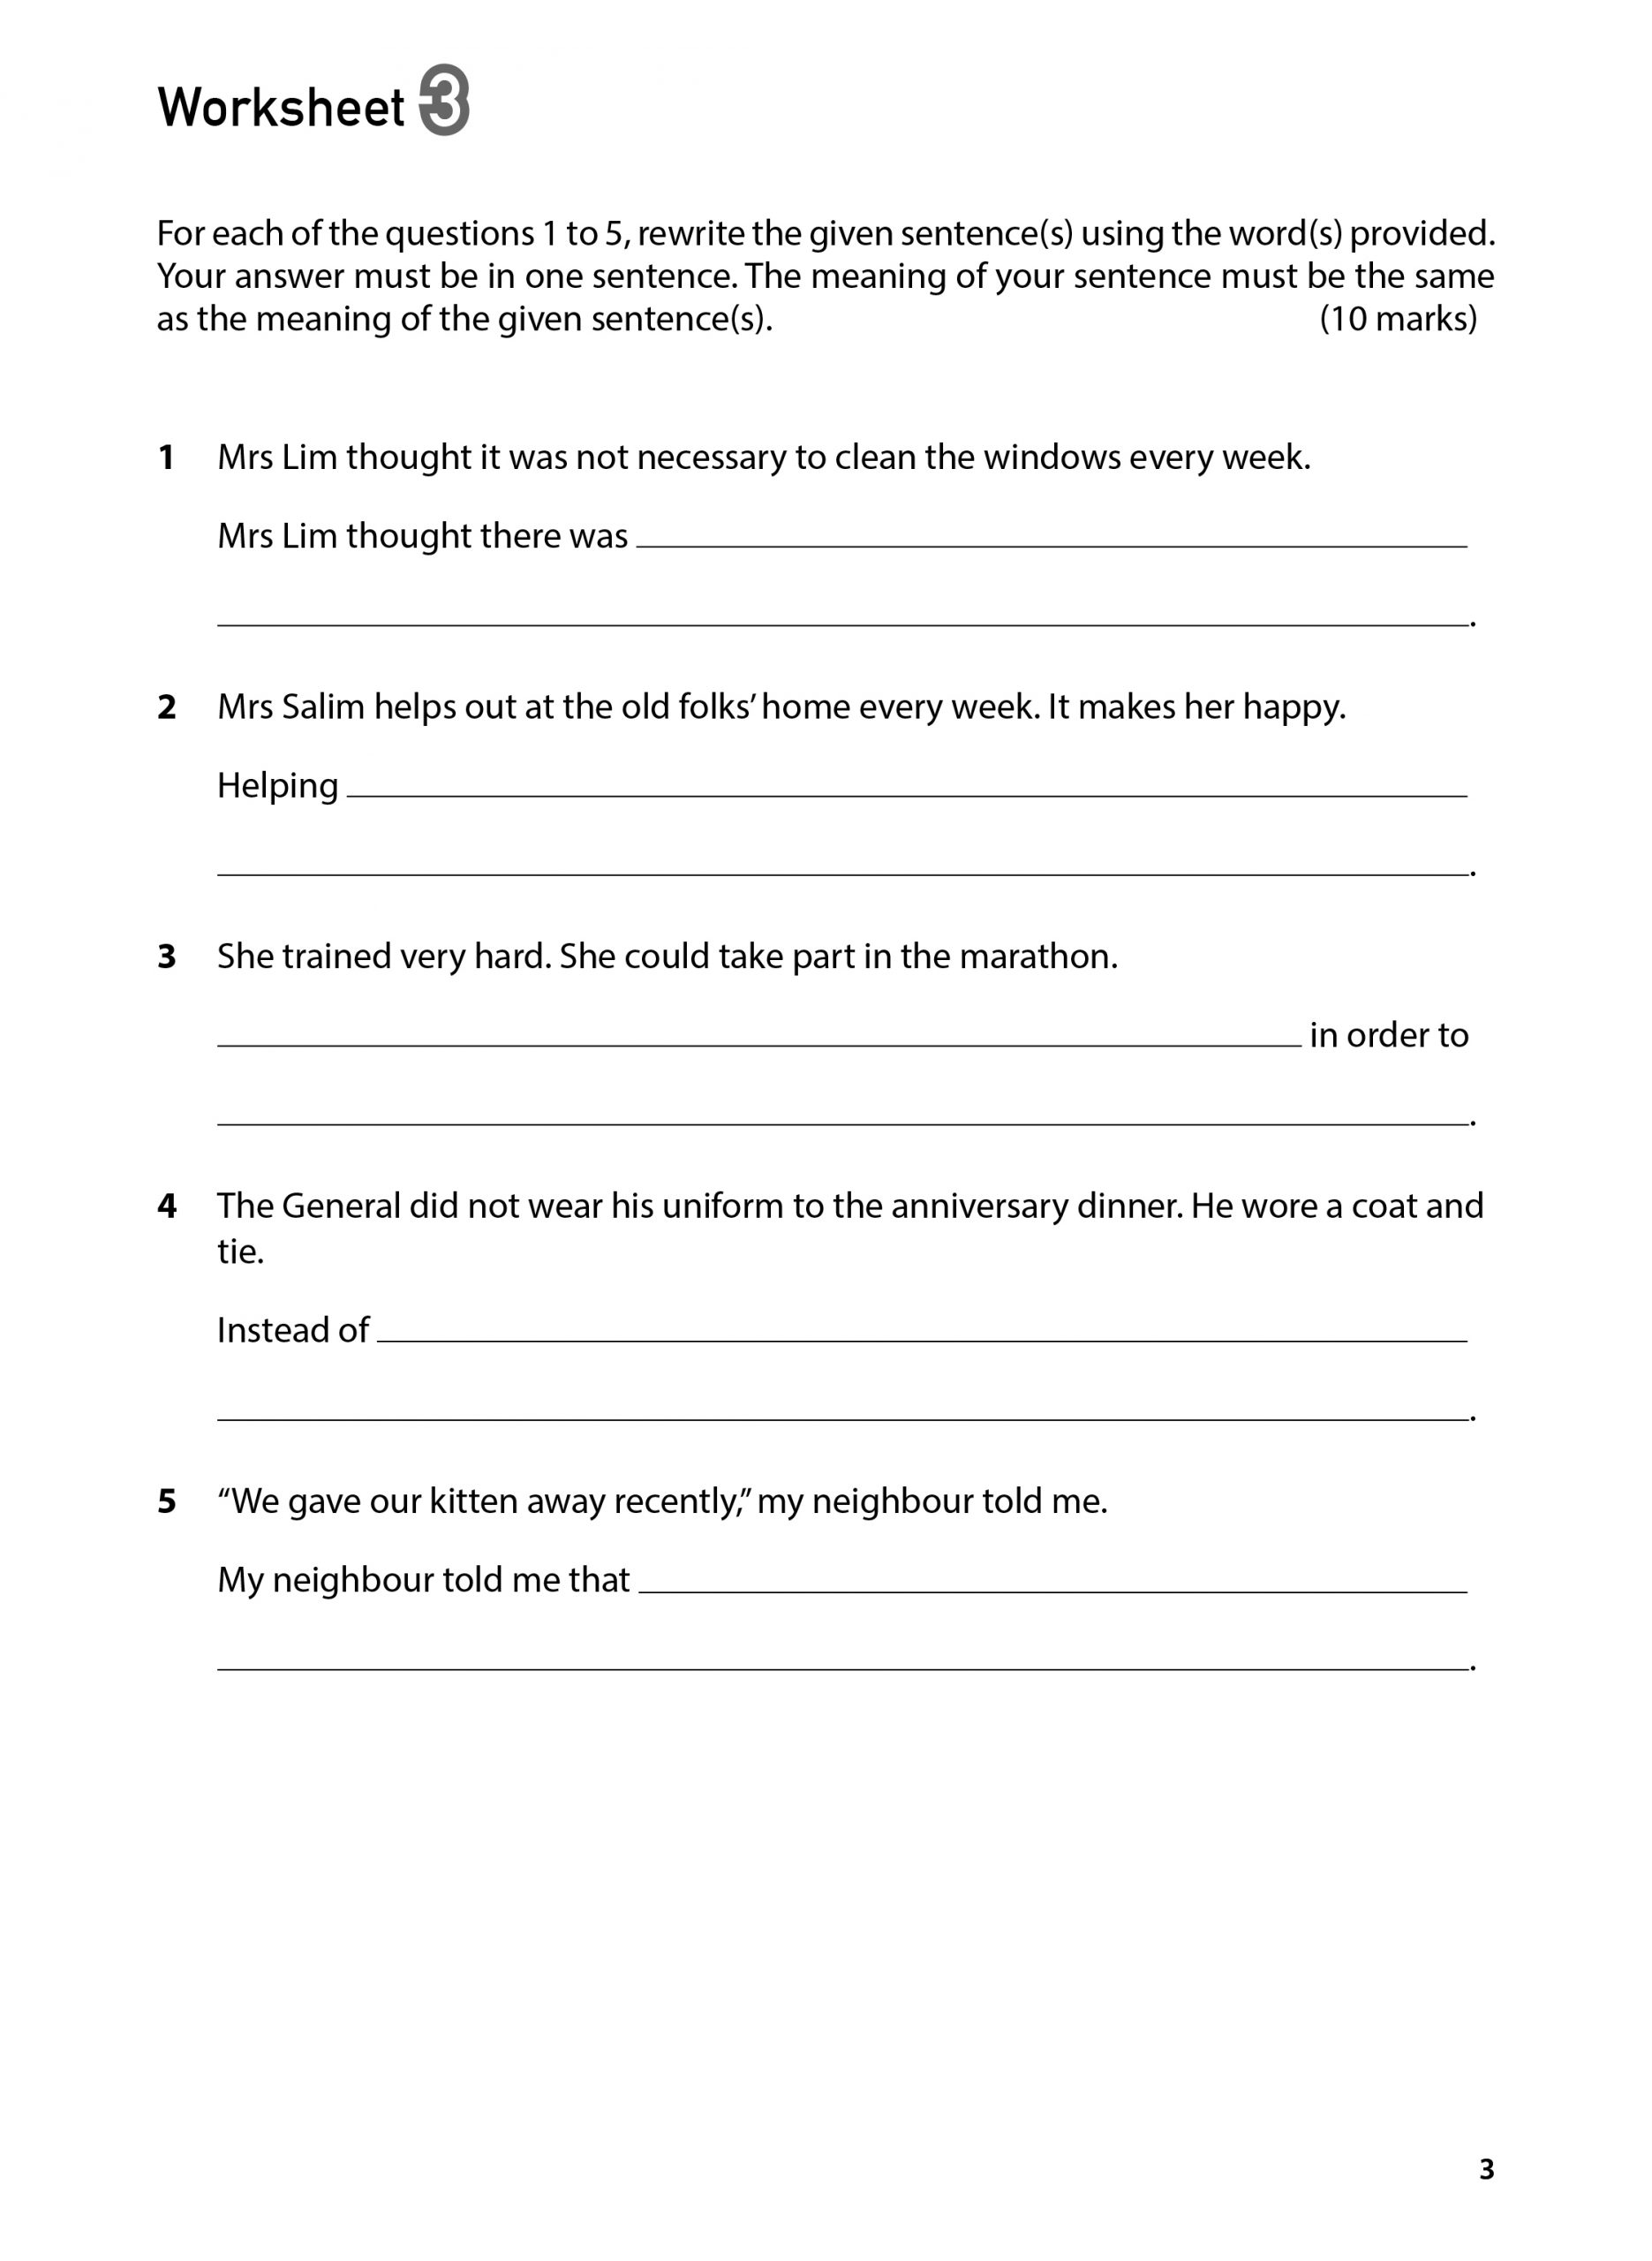 Synthesis Of Sentences Worksheets